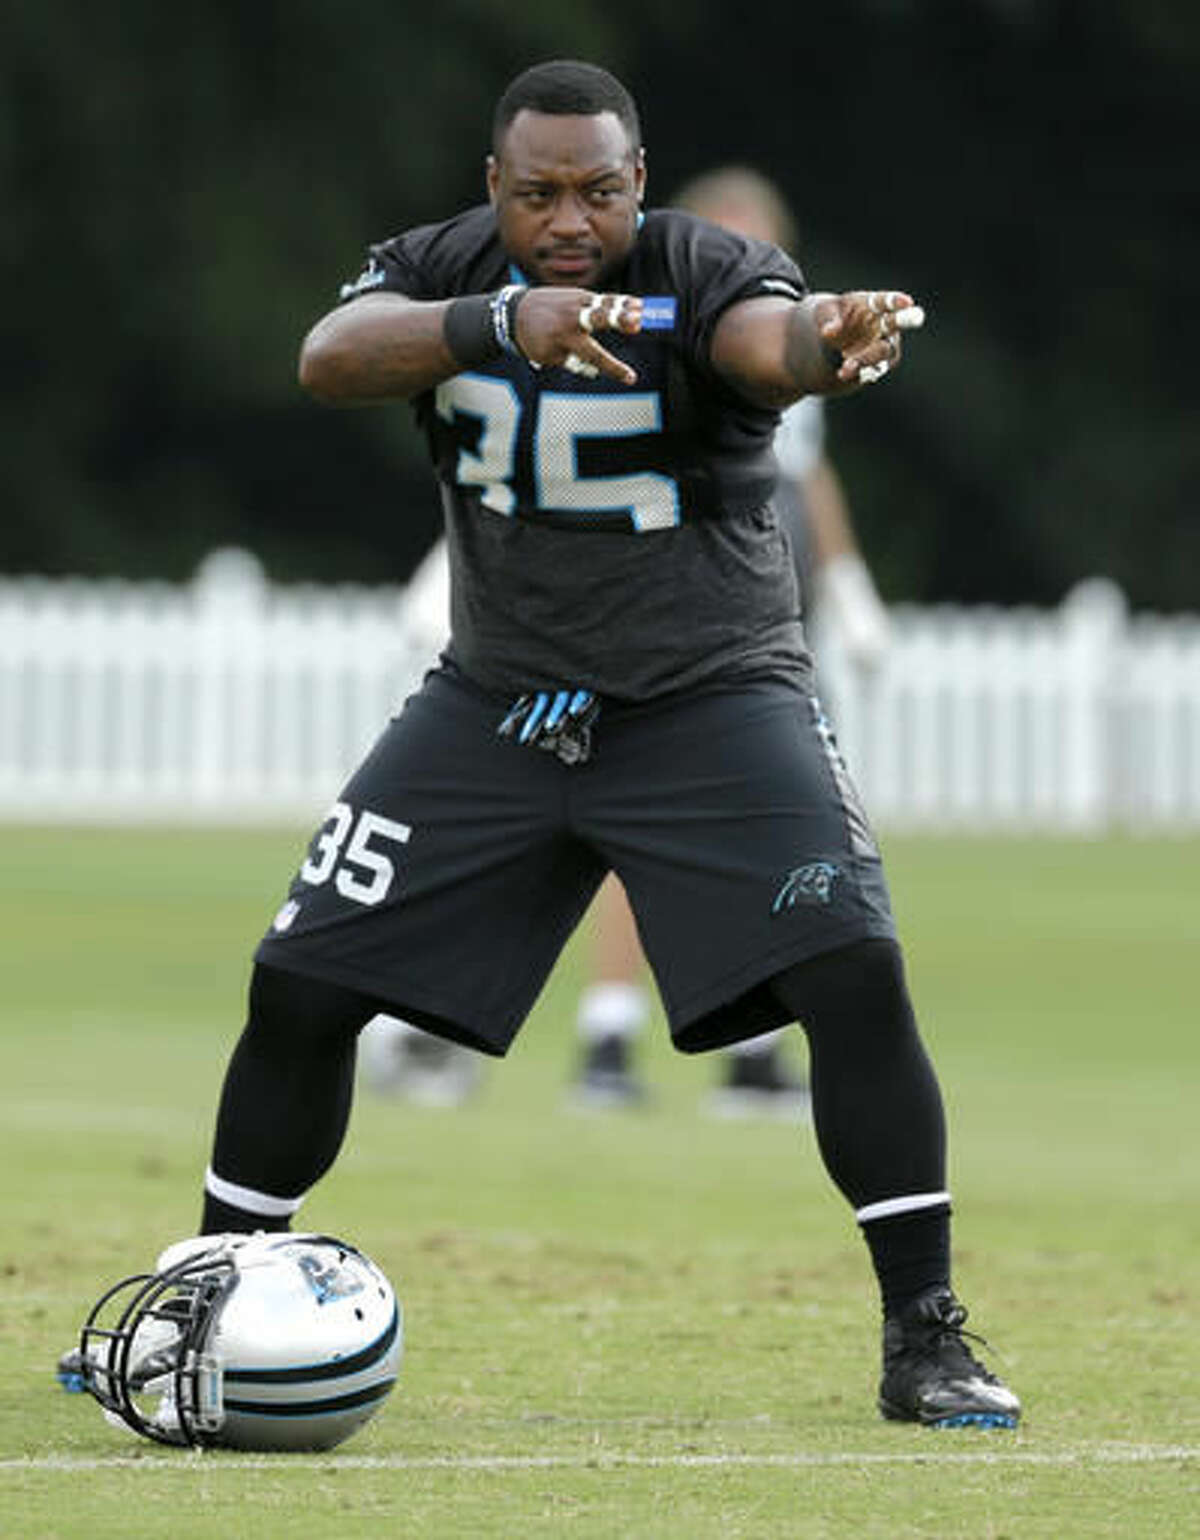 Carolina Panthers' Mike Tolbert fires up the team during an NFL training camp practice in Spartanburg, S.C., Tuesday, Aug. 9, 2016. NFL teams seem to migrating away from using the traditional fullback. Seven teams don't even have one listed on their roster. But for the NFC champion Panthers Mike Tolbert remains an effective _ and needed _ part of their offense. (AP Photo/Chuck Burton)